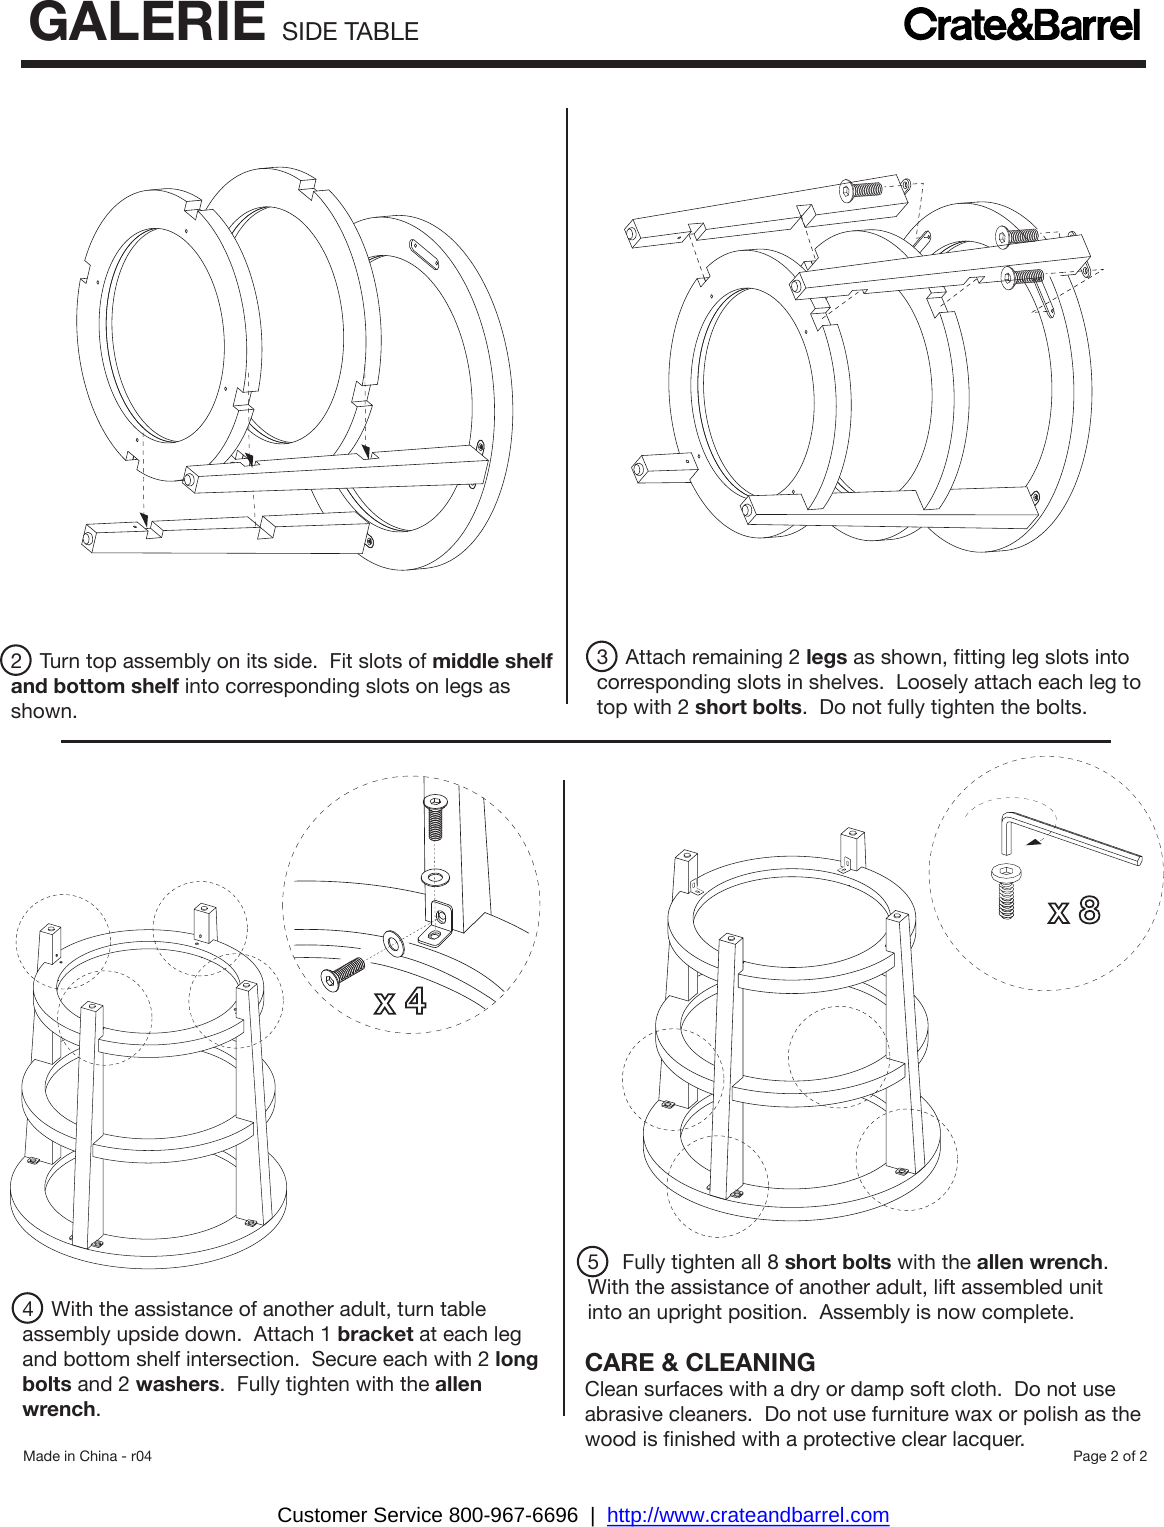 Page 2 of 2 - Crate-Barrel 487-Galerie-Side-Table Galerie Side Table Assembly Instructions From Crate And Barrel